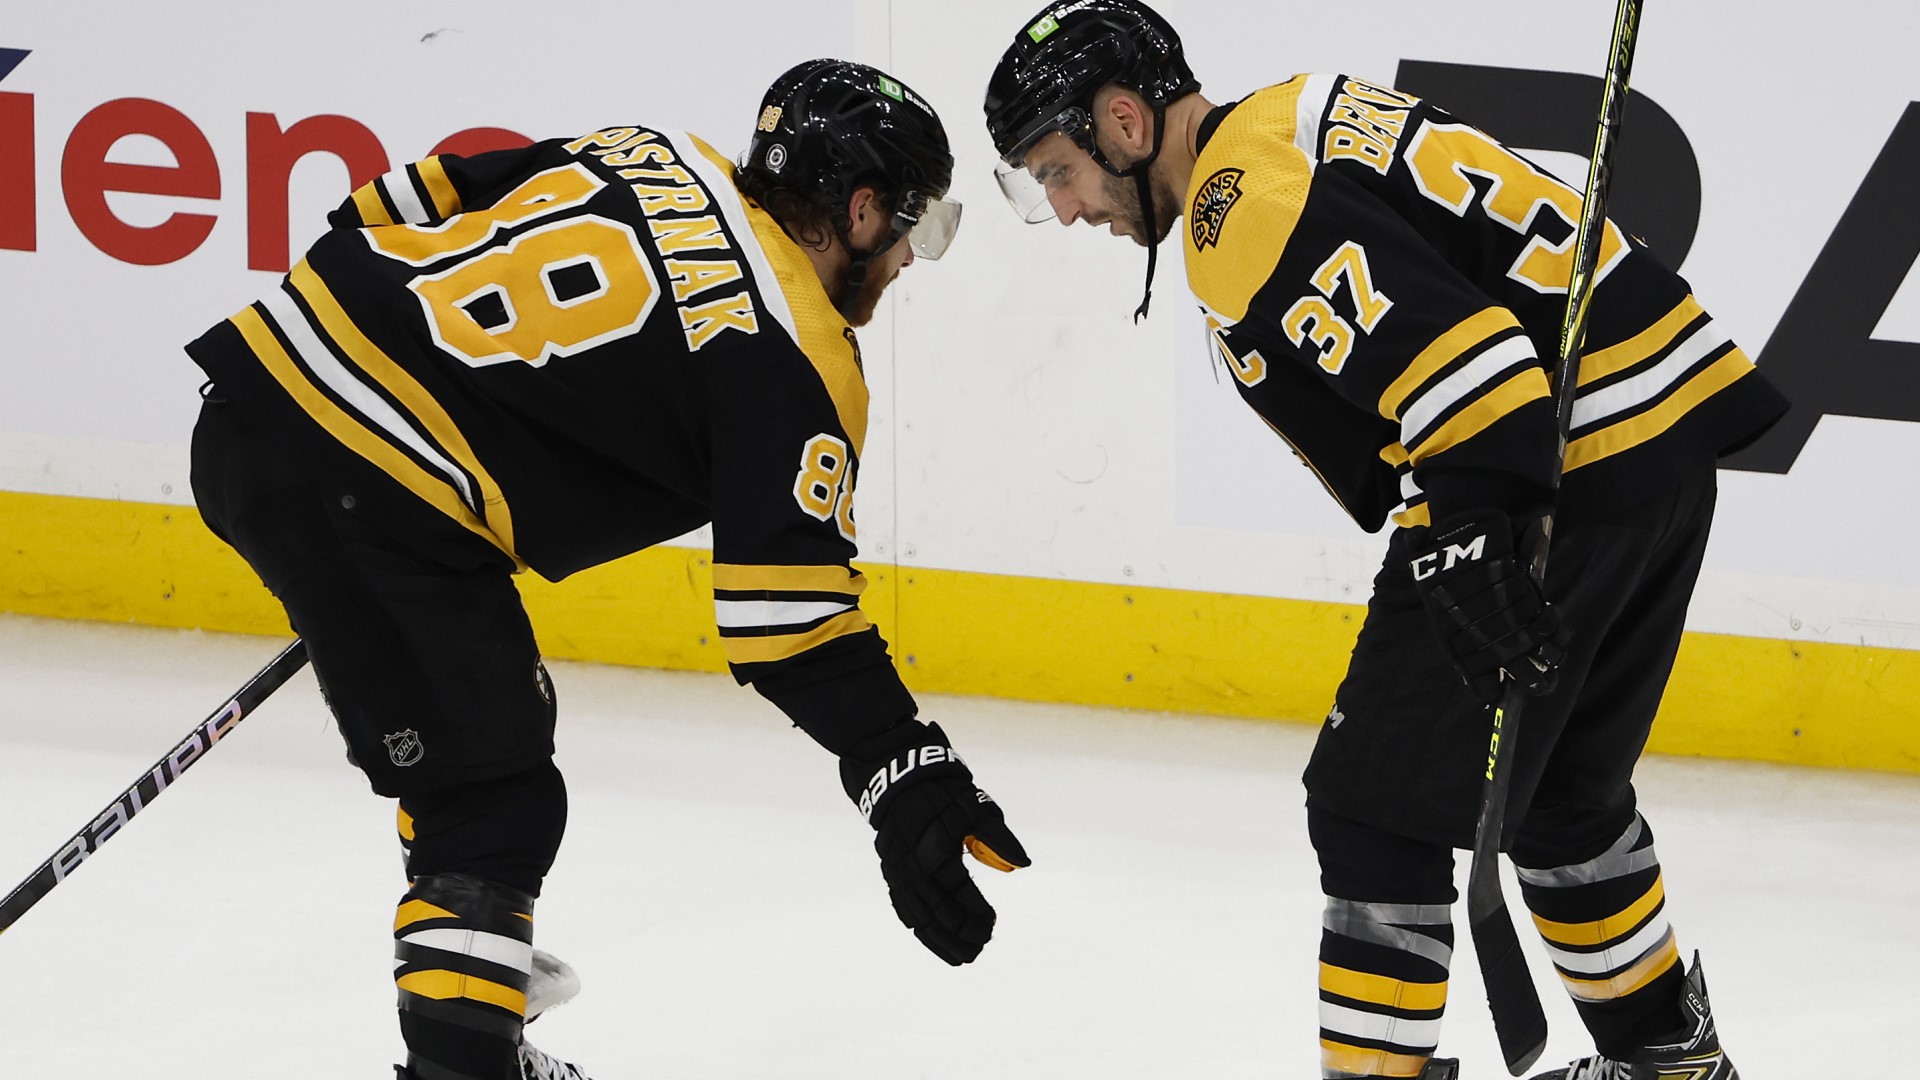 Tony Amonte: Reports of Patrice Bergeron going to Canadiens next